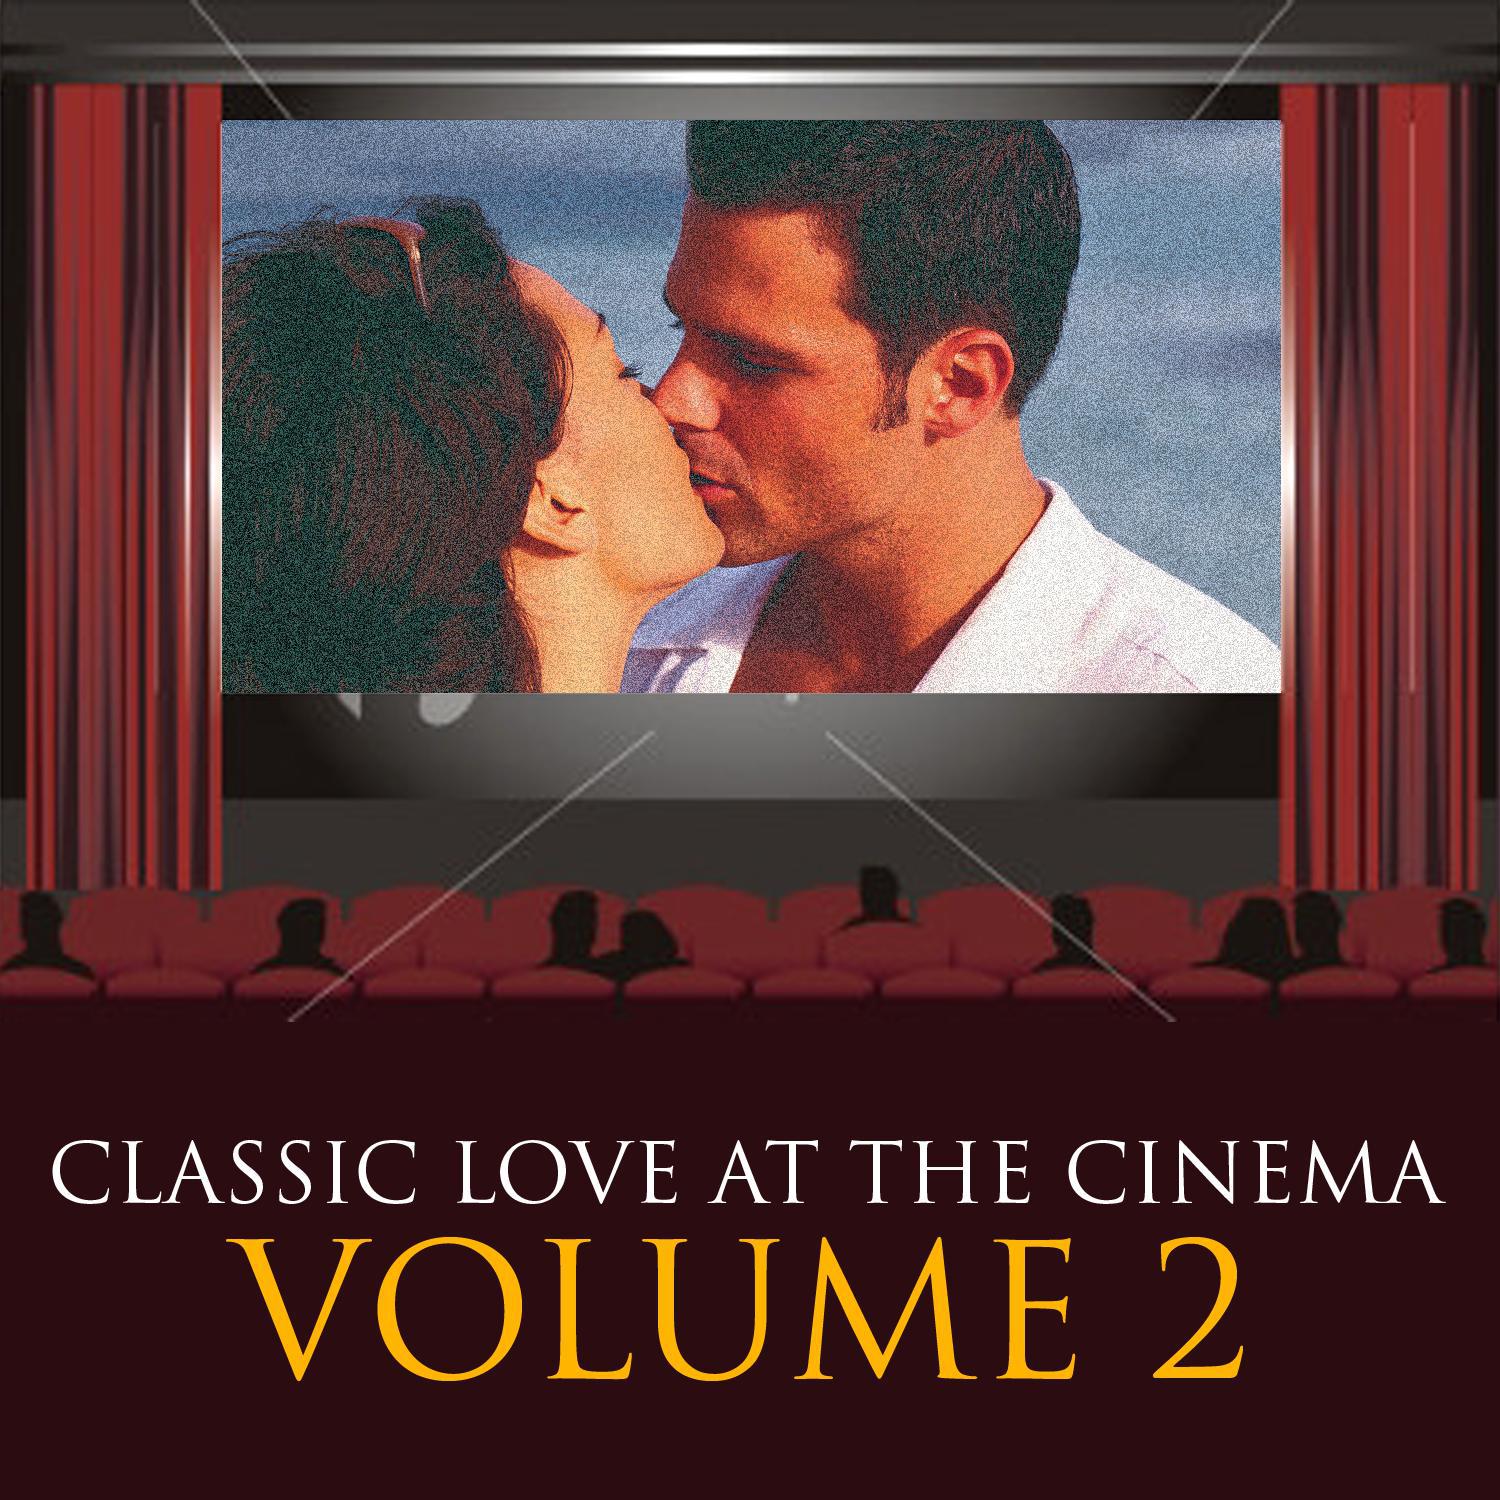 Classical Love At The Cinema Volume 2